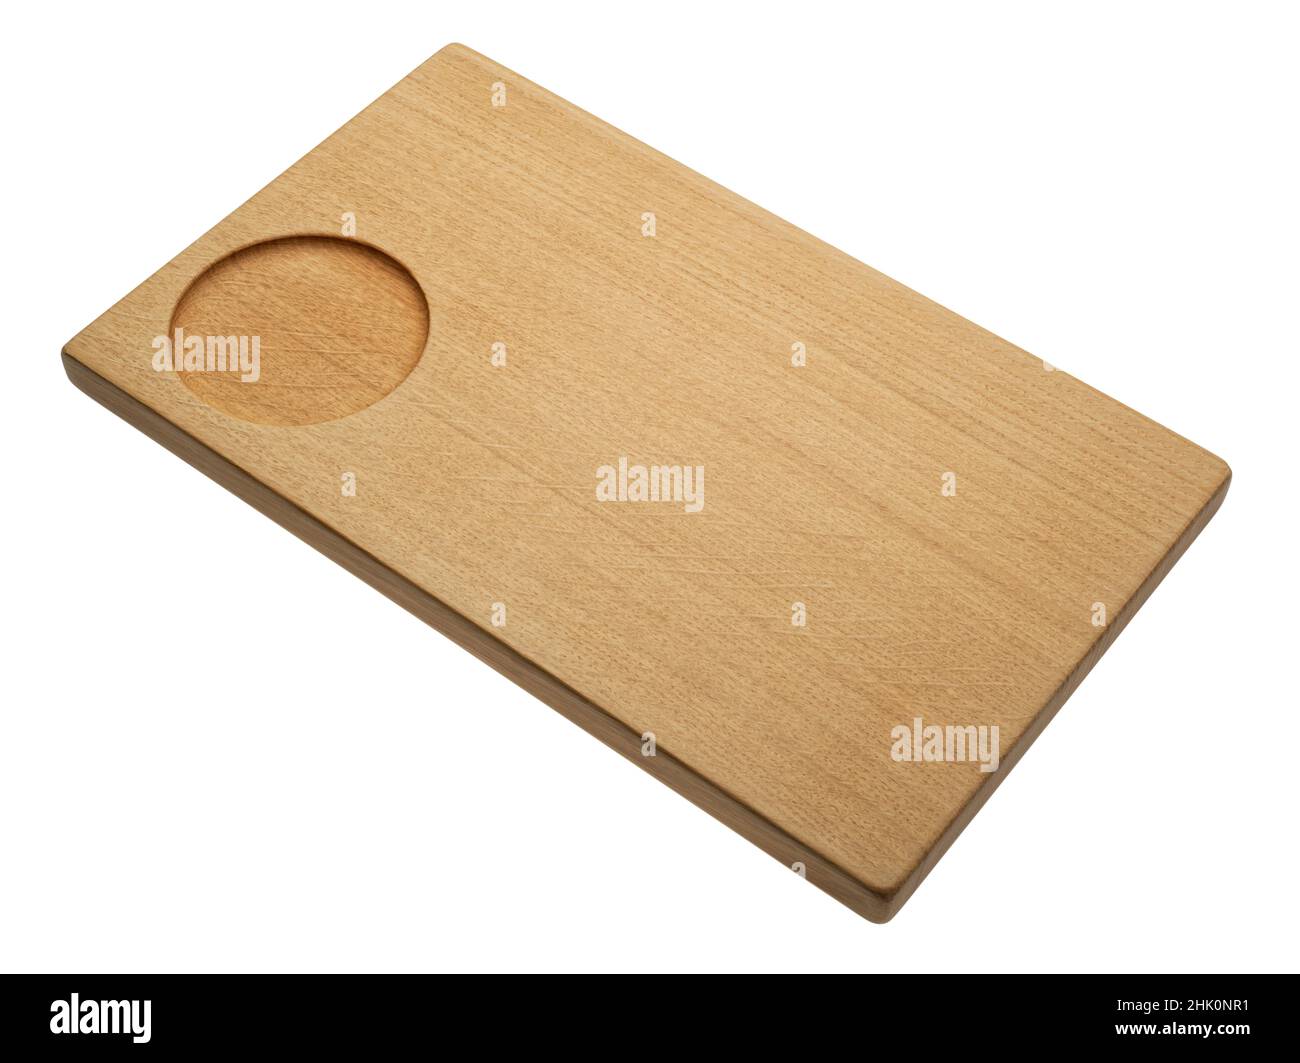 Chopping board or cutting board. A cut out against a white background. Food preparation cutting surface used in the kitchen. Stock Photo